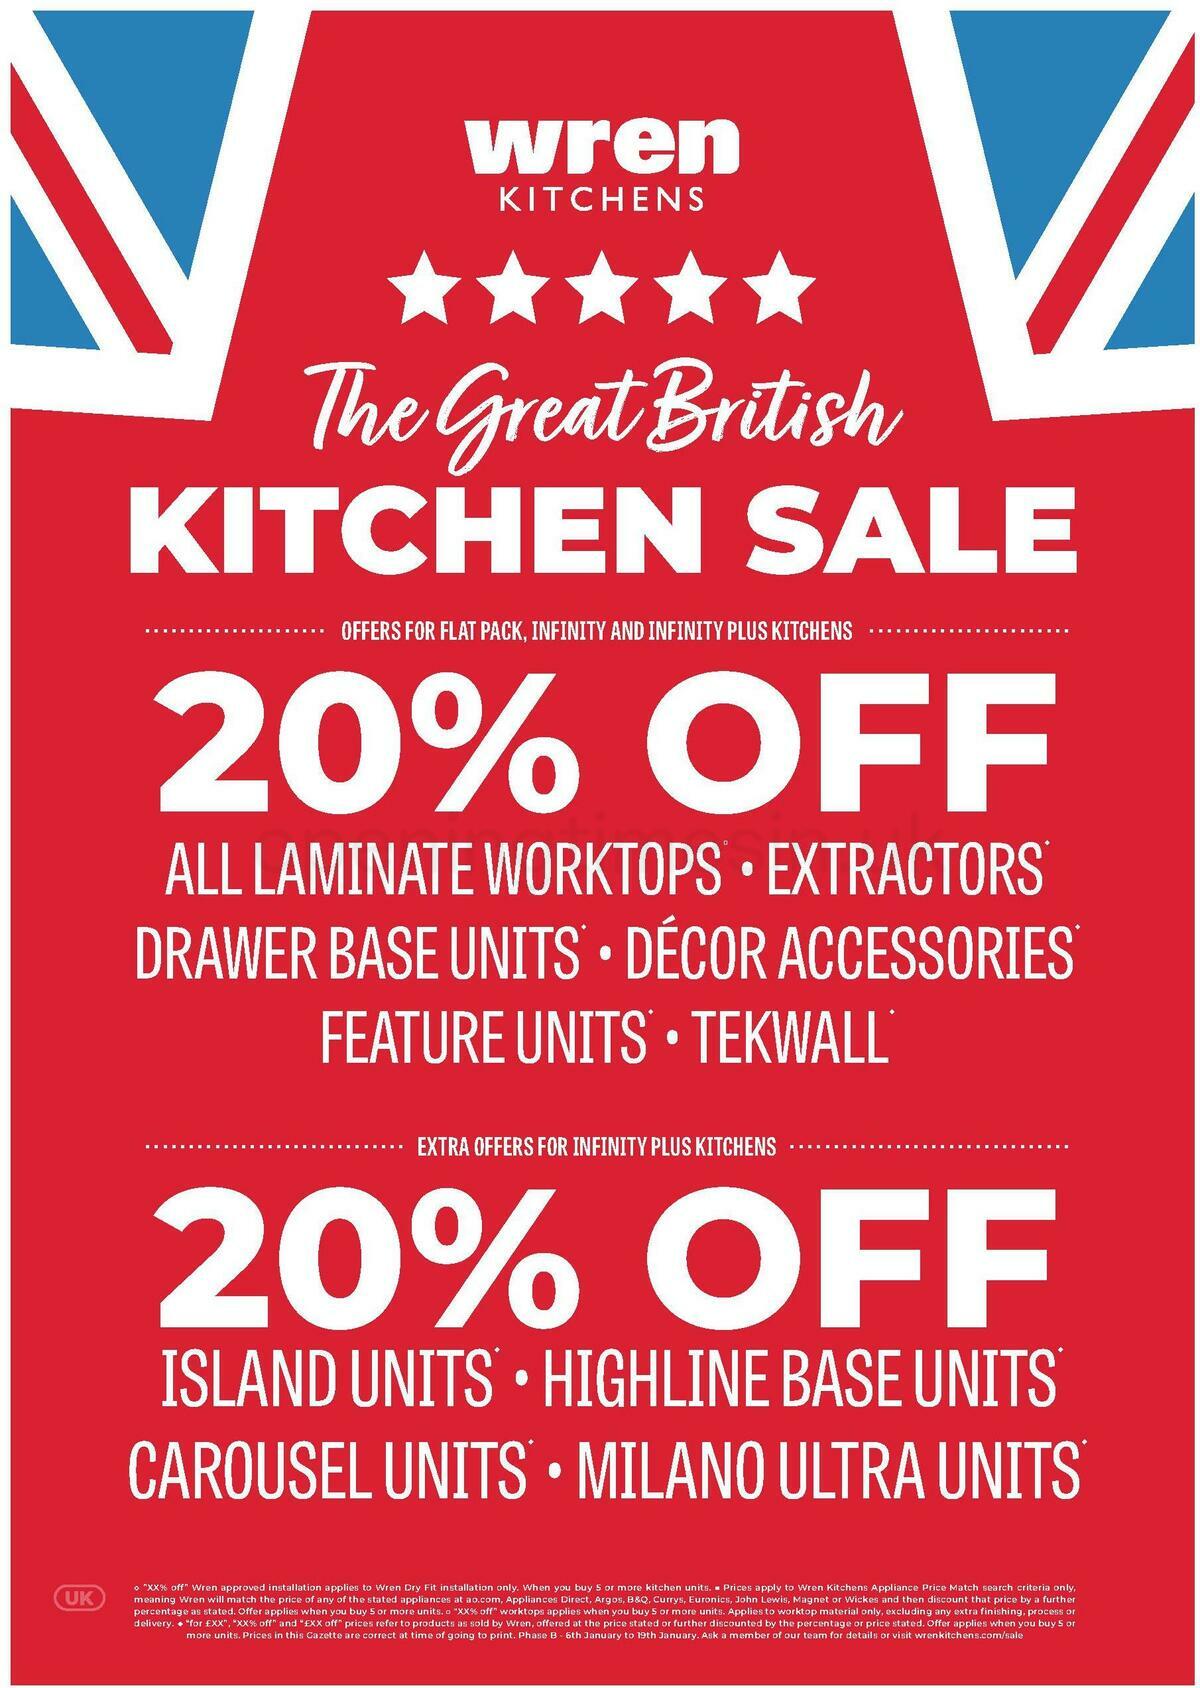 Wren Kitchens Offers from January 6